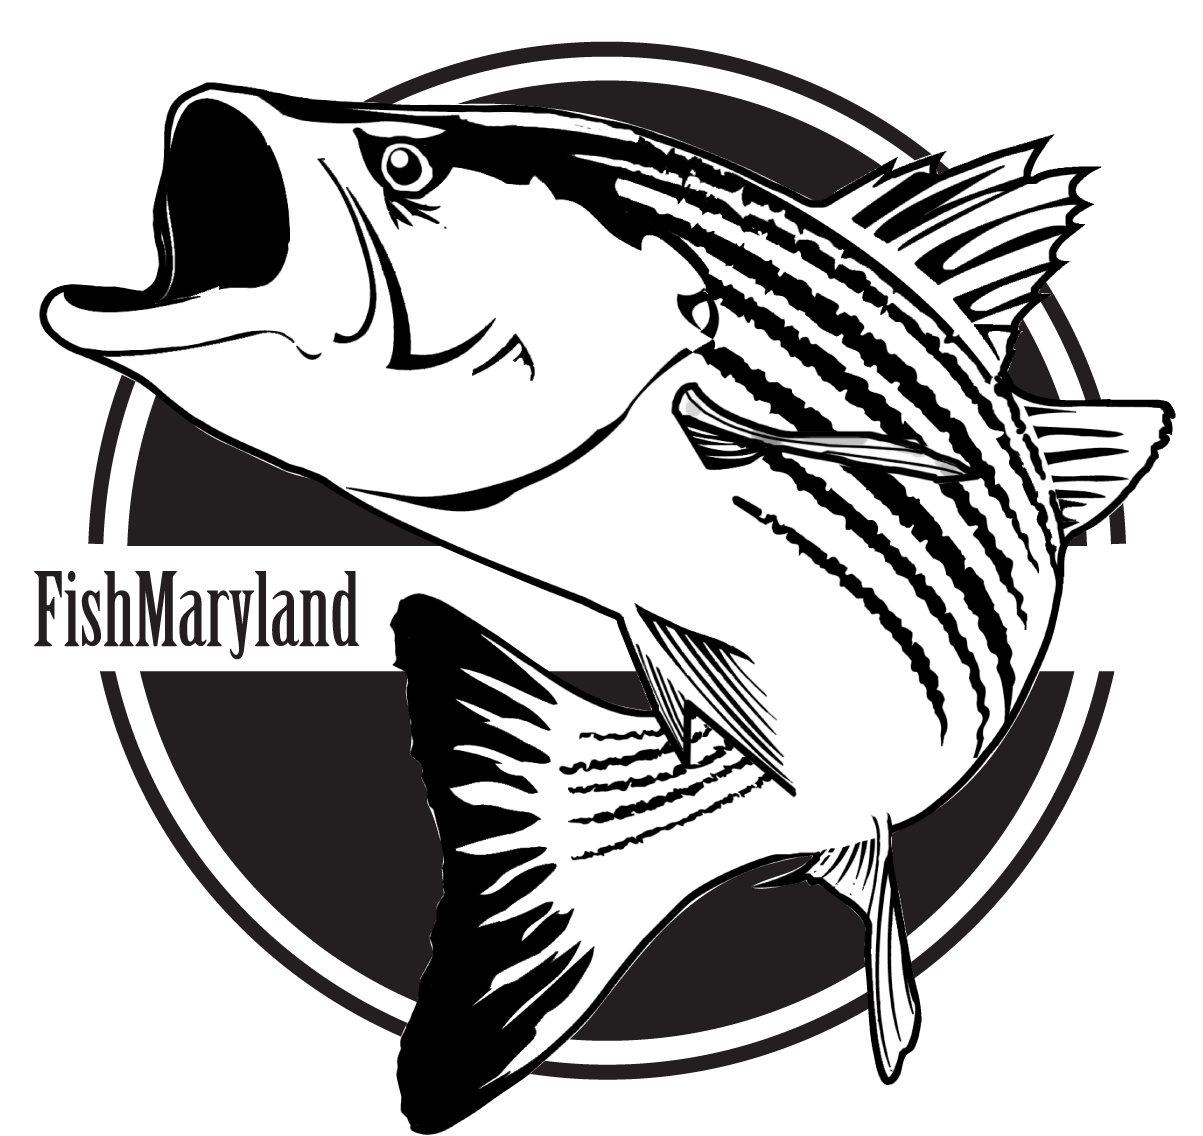 Register Your Catch for a FishMaryland Certificate